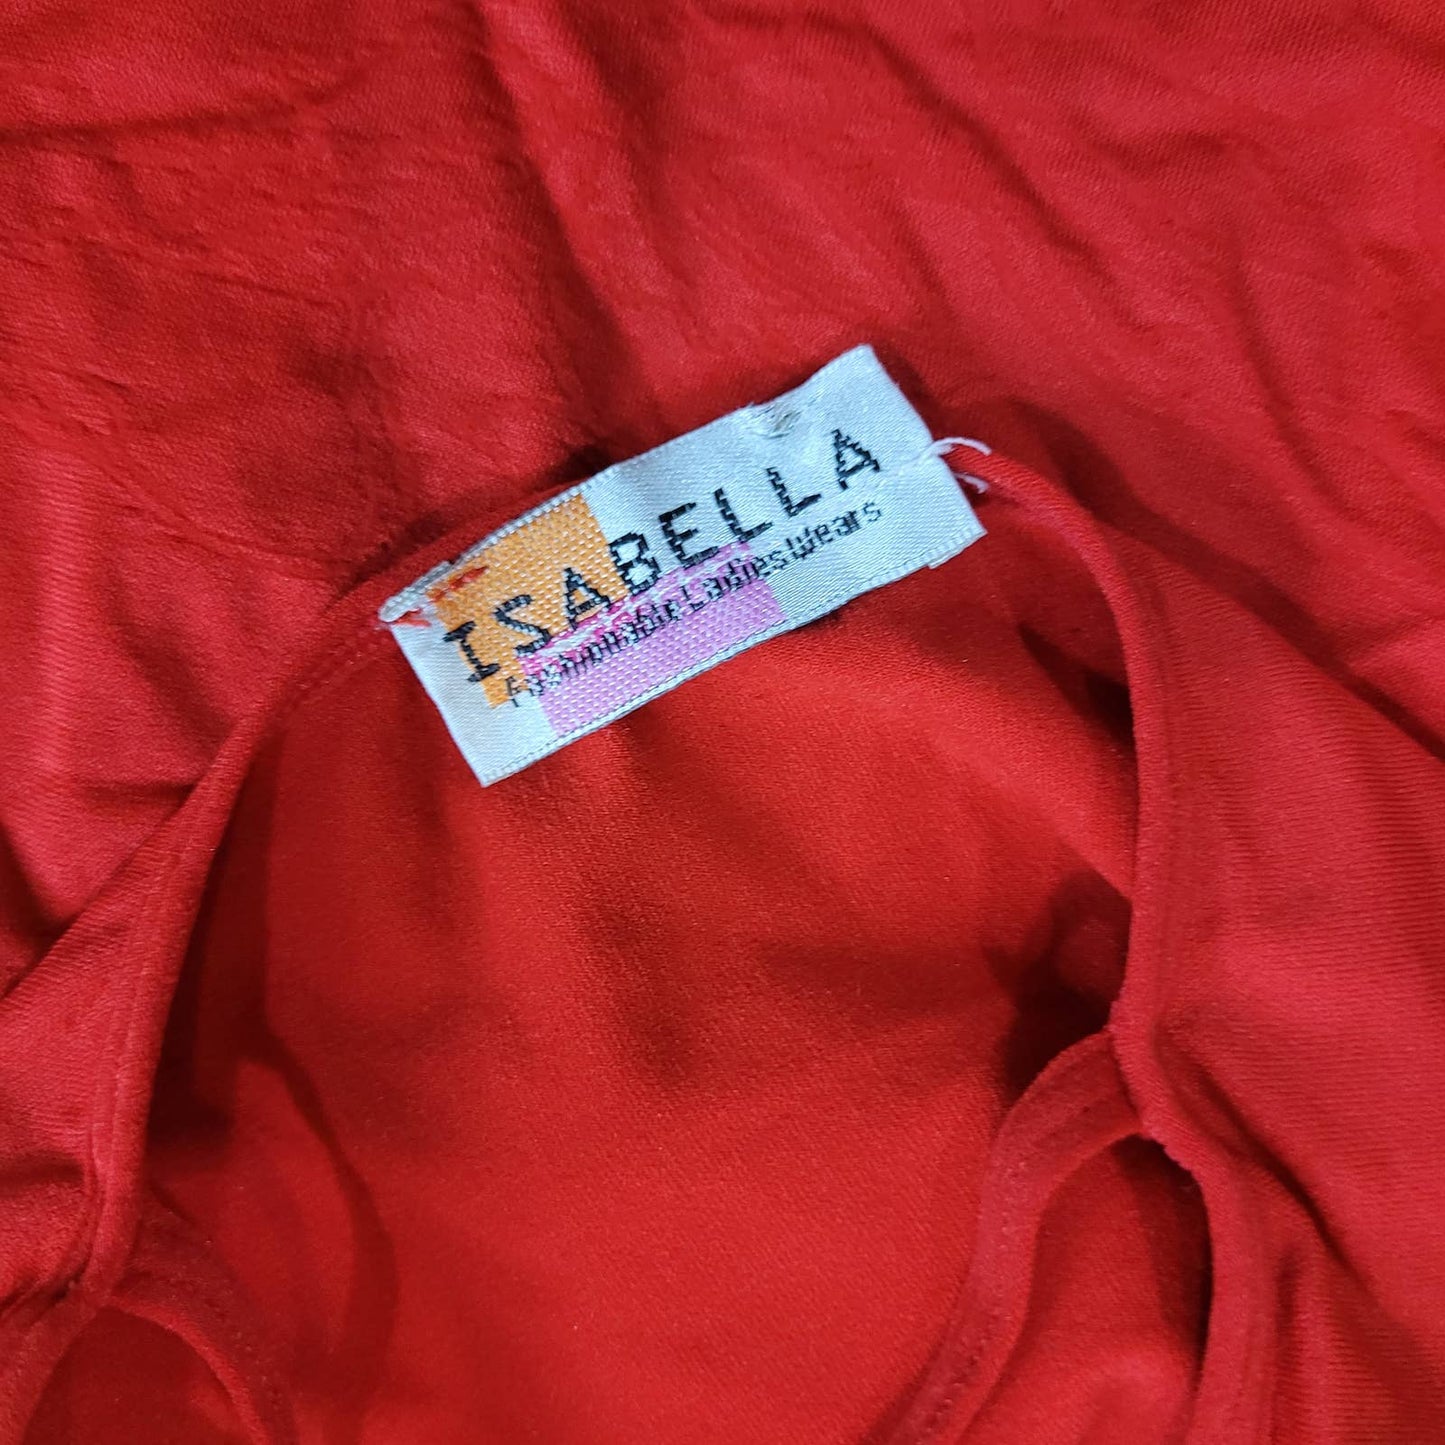 Isabelle Red Tank - Size Extra Small